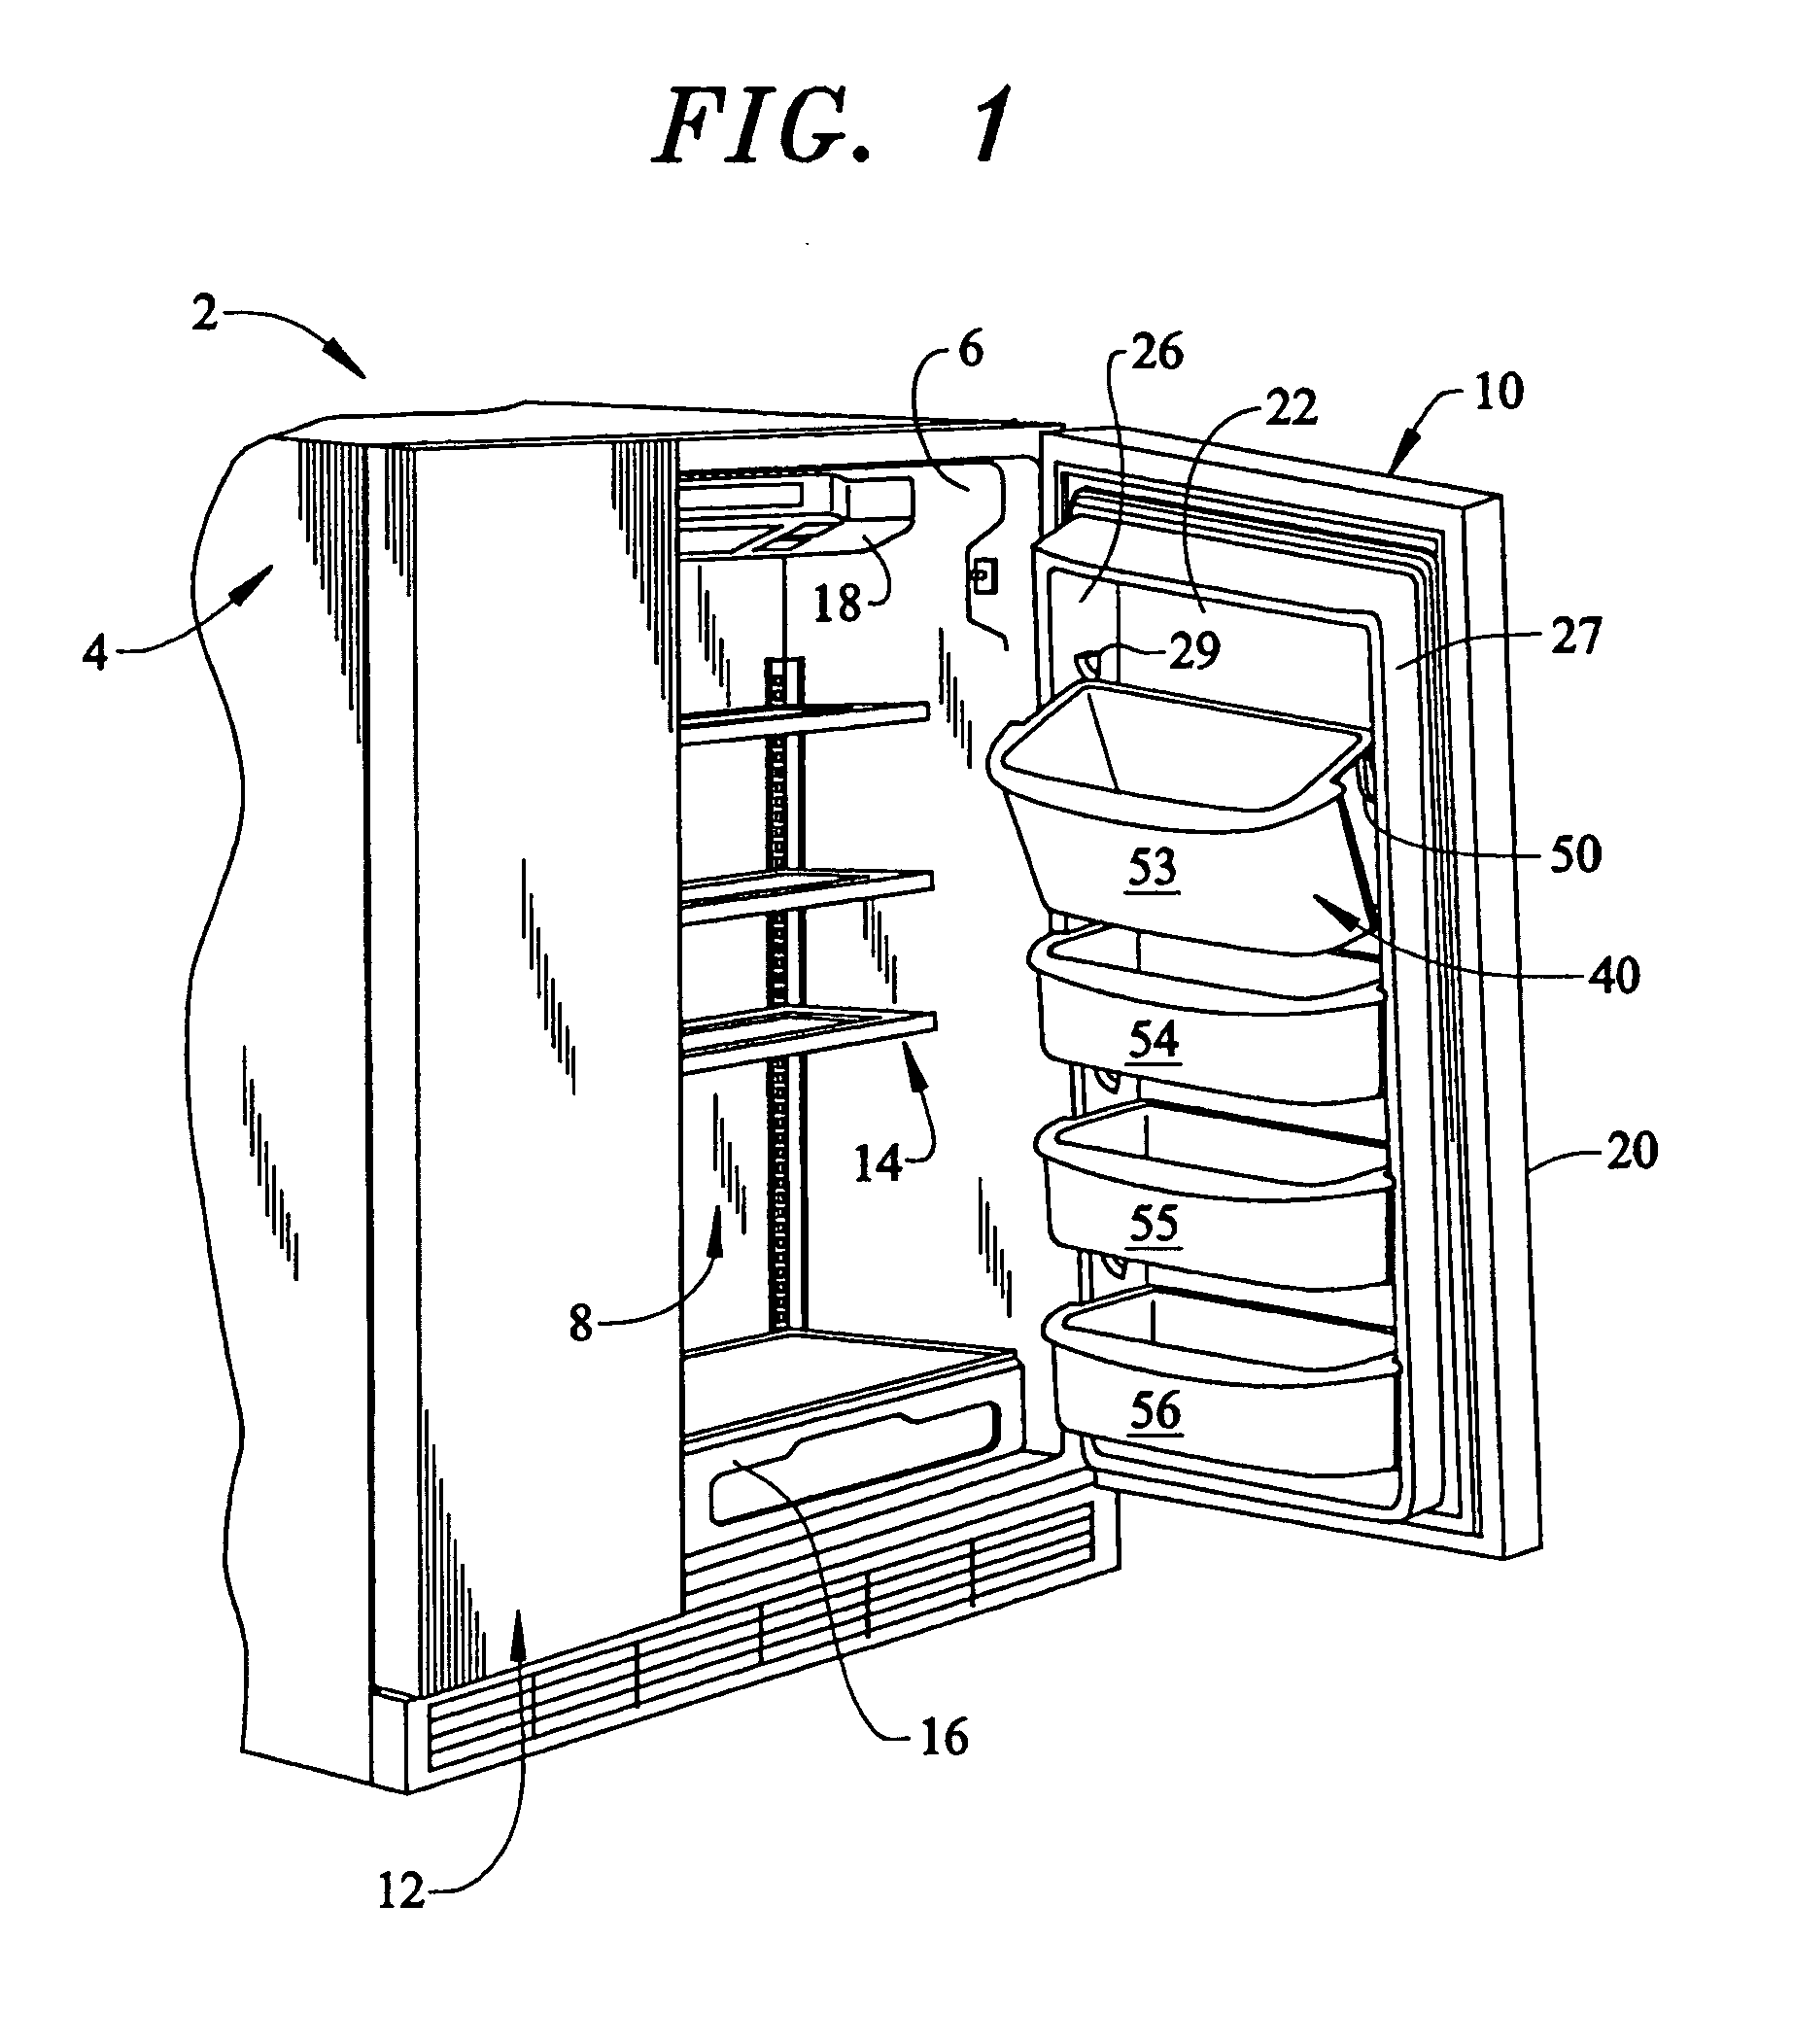 Bucket assembly for a refrigerator